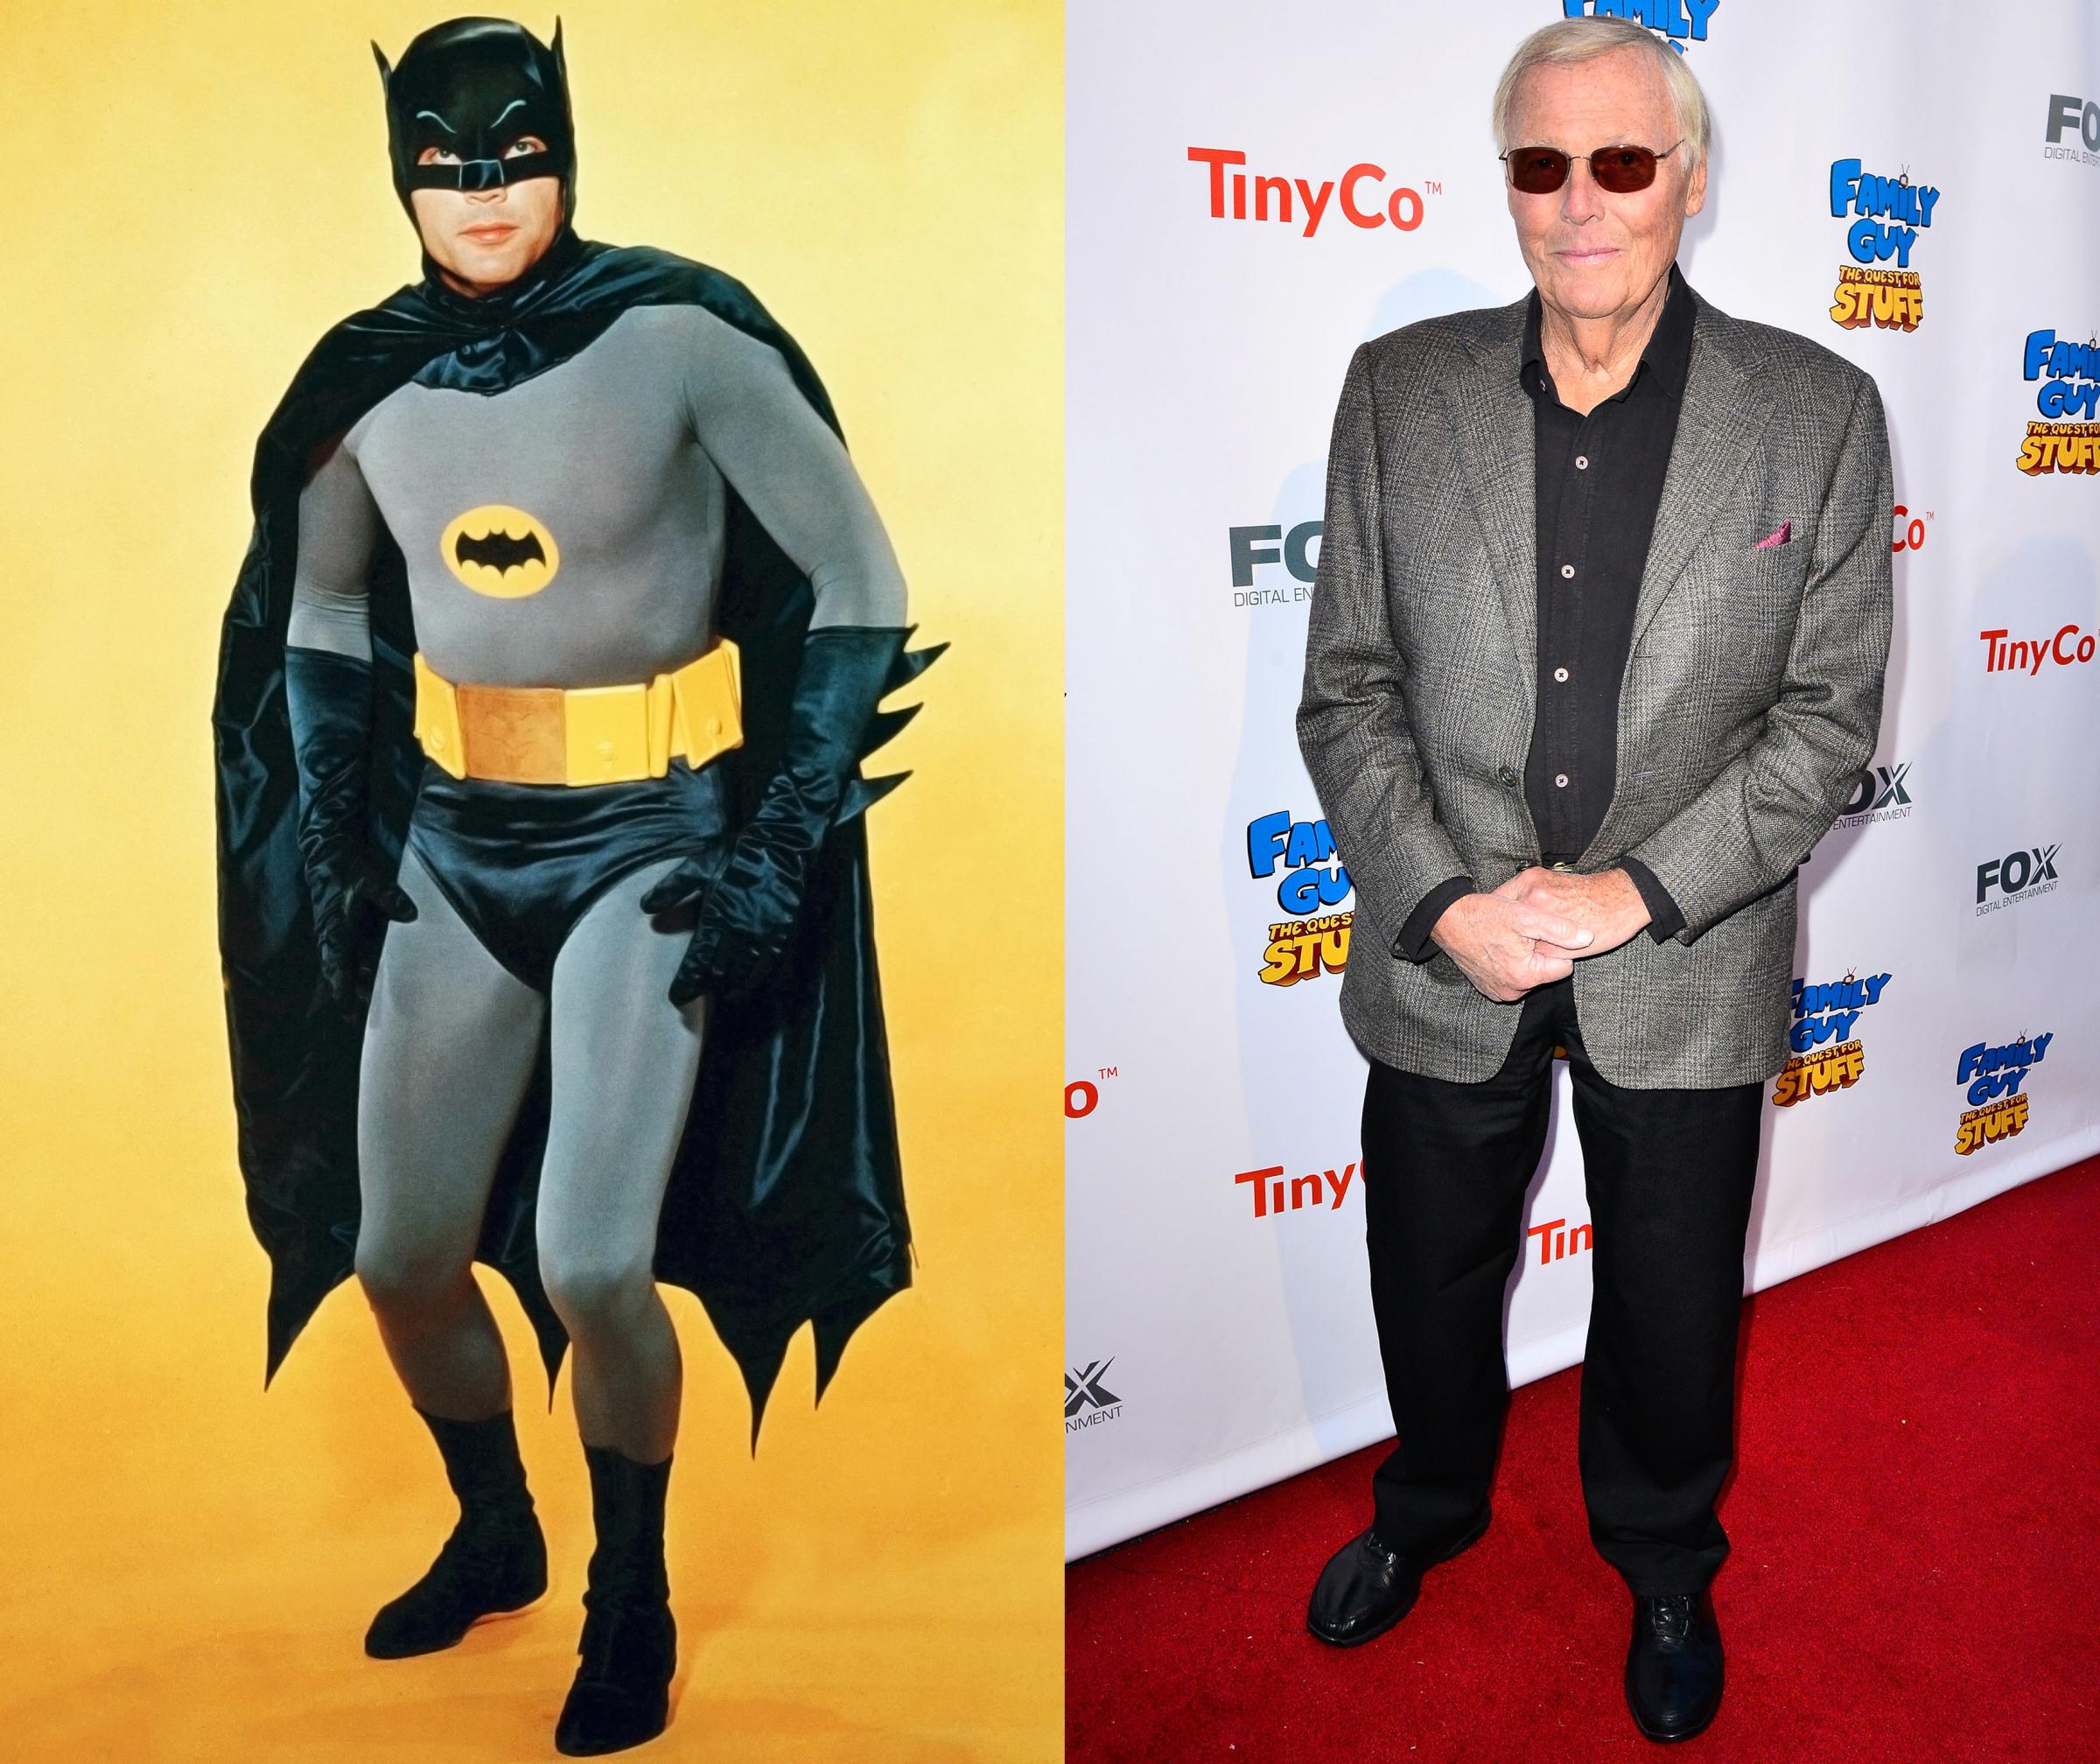 Adam West, US actor, in costume in a studio portrait, against a yellow background, issued as publicity for the television series, 'Batman', USA, circa 1966. The television series featuring DC Comics characters, starred West as 'Bruce Wayne' and his alter ego, 'Batman'. (Photo by Silver Screen Collection/Getty Images)